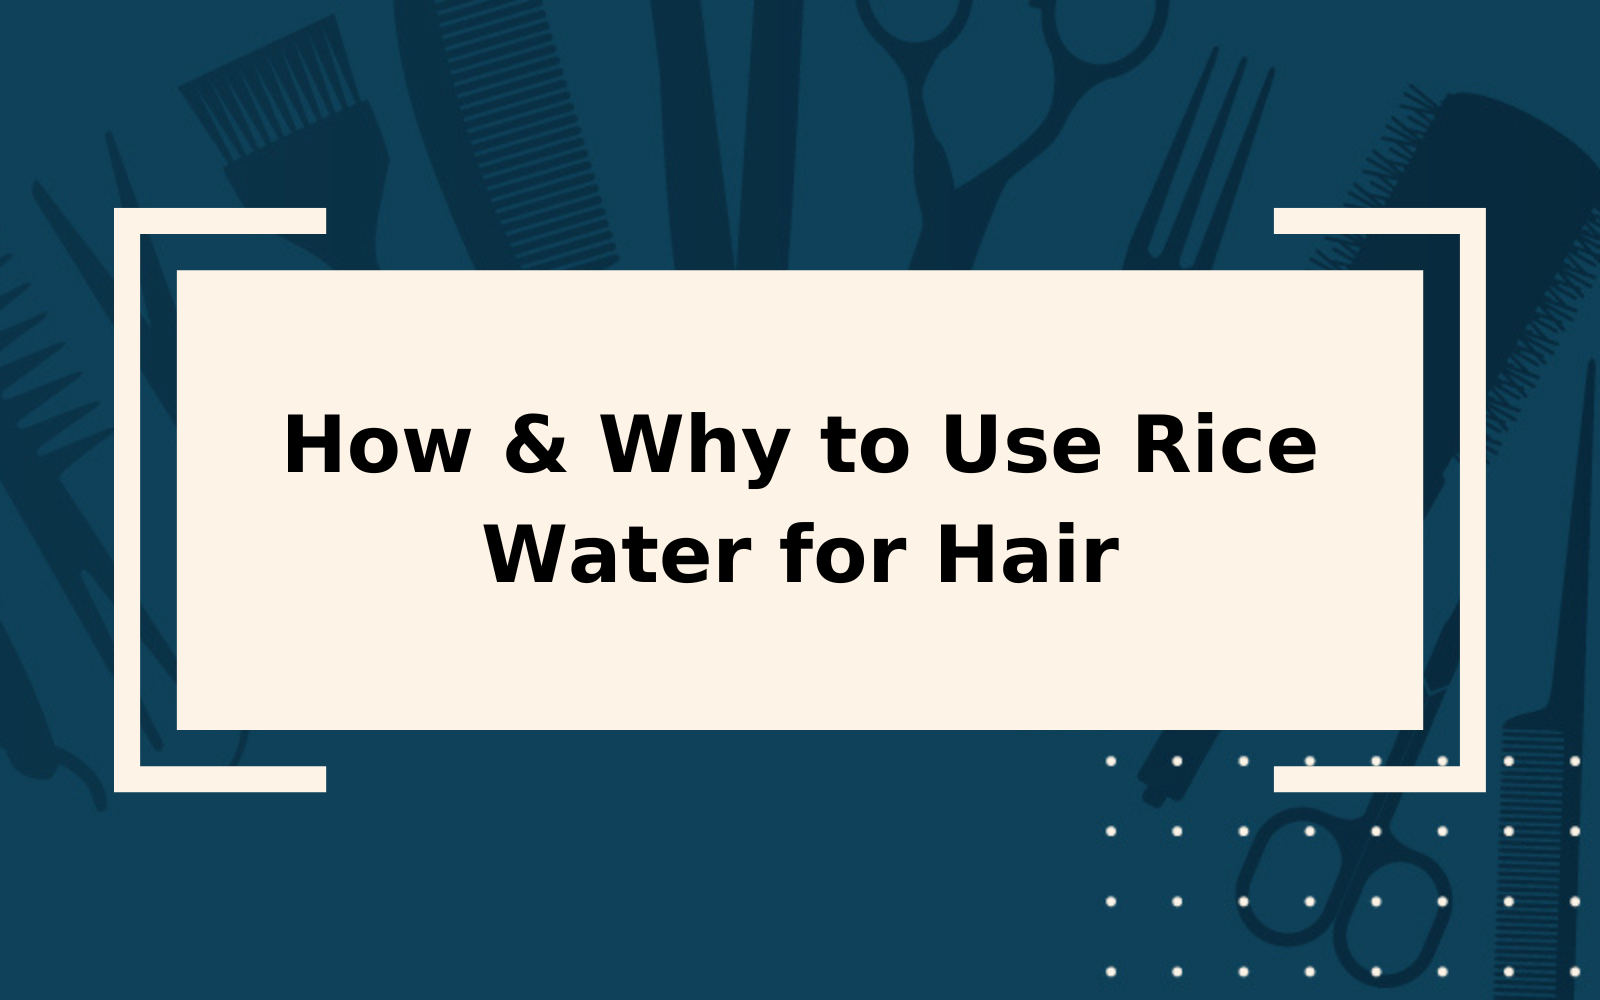 Rice Water for Hair | Why & How to Use It